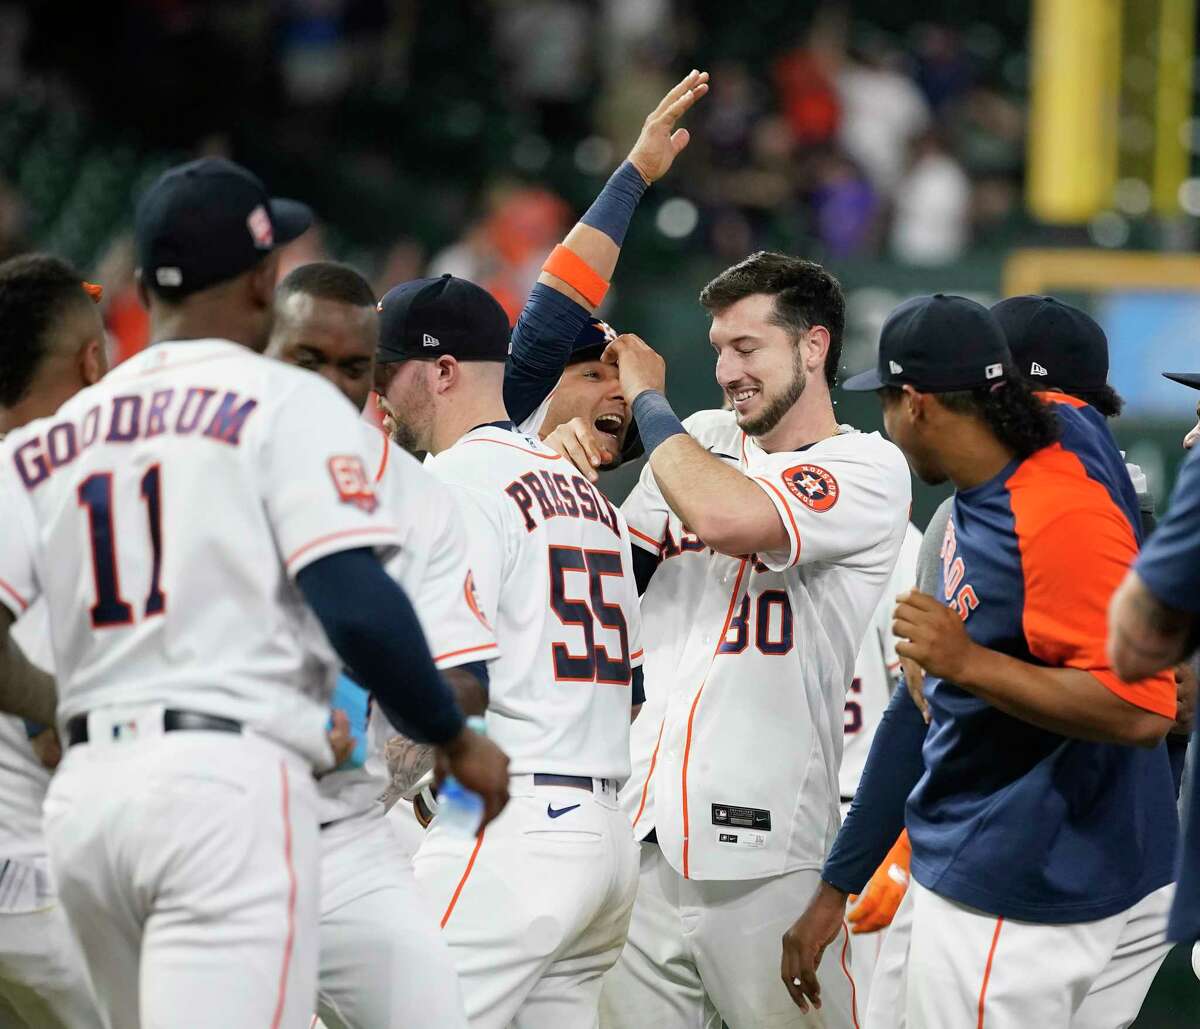 Houston Astros Kyle Tucker (30) celebrates with teammates after he hit an RBI single which scored the game wining run during the ninth inning of an MLB baseball game at Minute Maid Park on Thursday, May 5, 2022 in Houston.